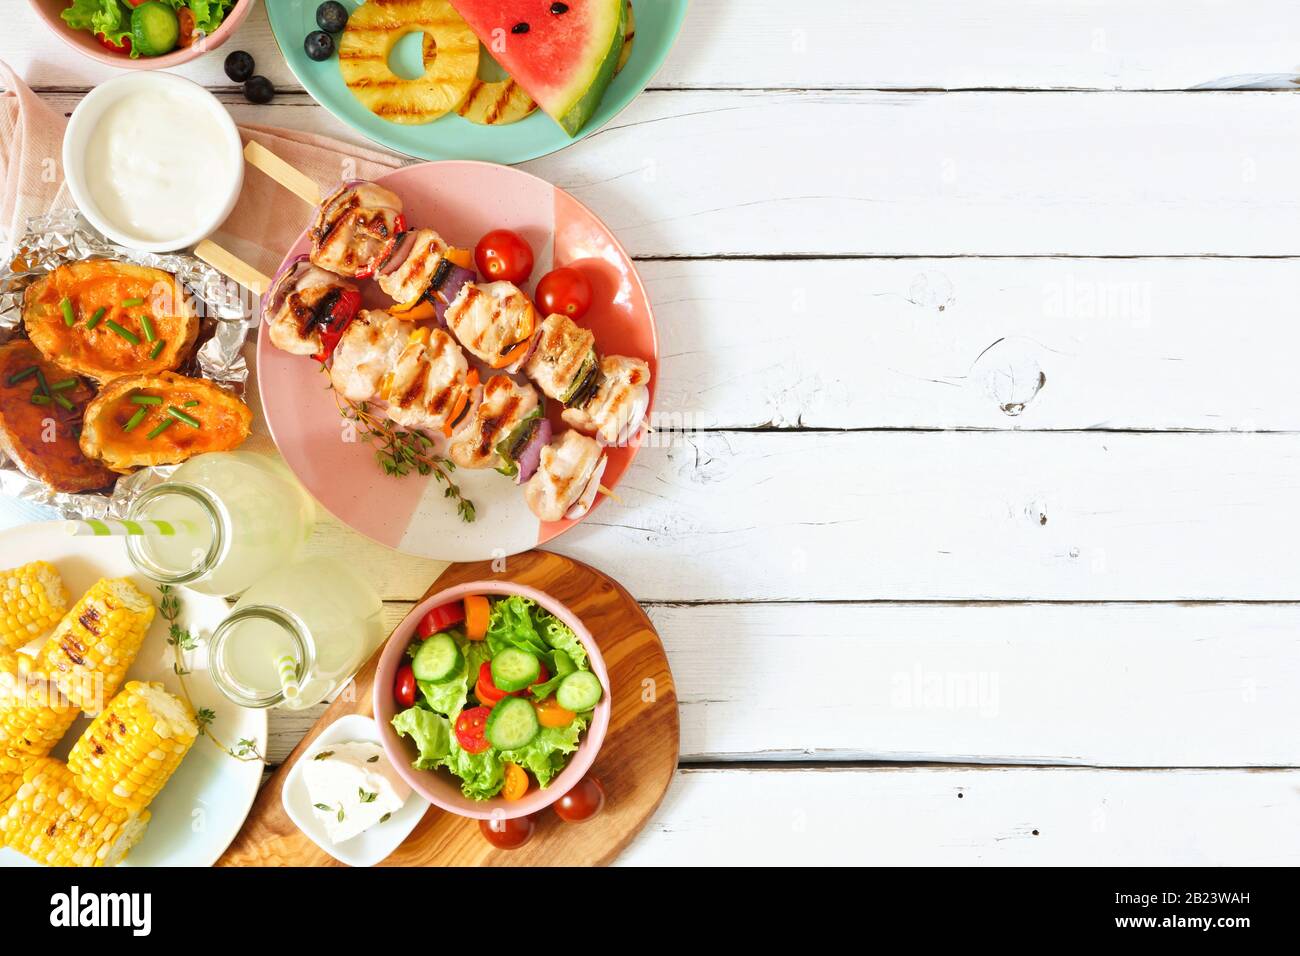 Summer BBQ or picnic food side border. Selection of grilled meat, fruits, salad and potatoes. Above view over a white wood background. Copy space. Stock Photo